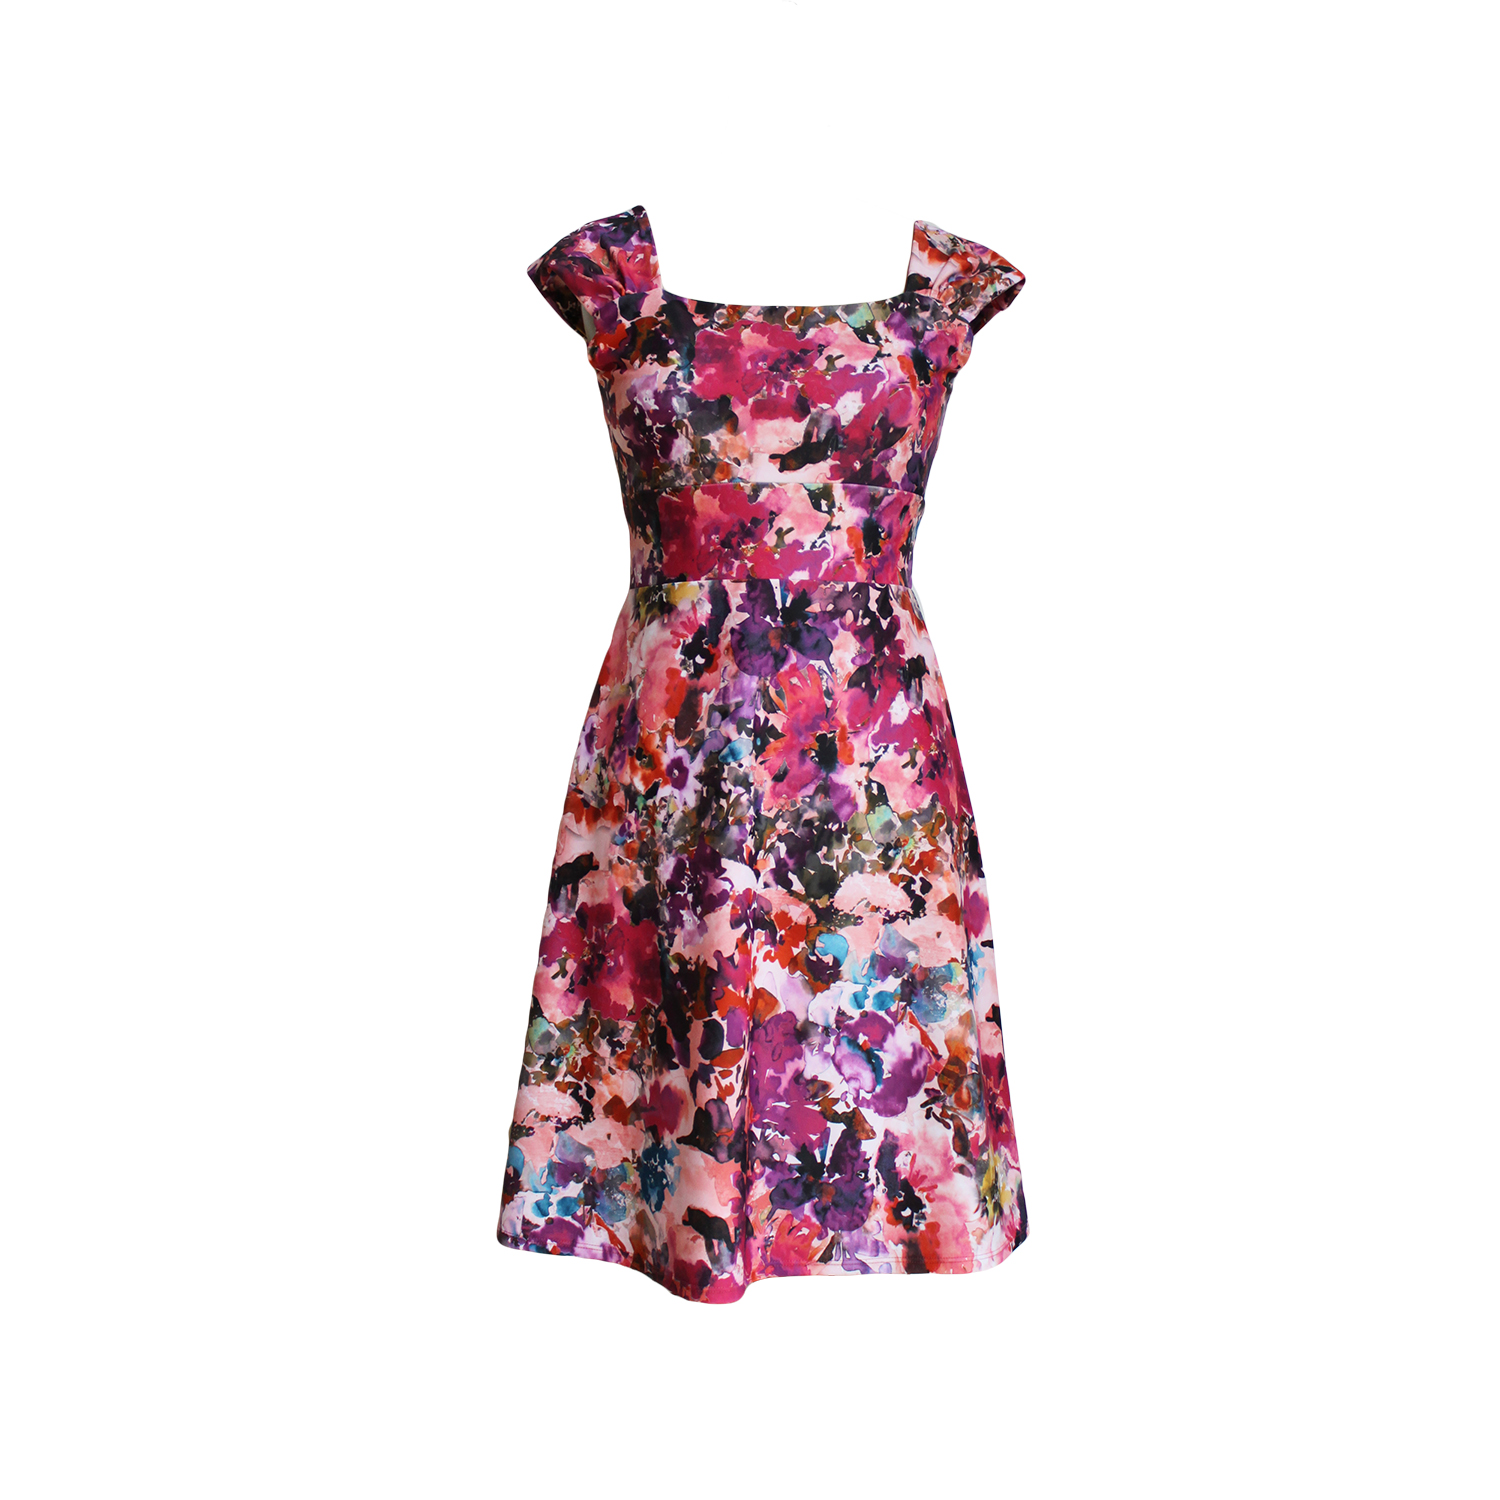 Travel Dress in Abstract Floral Print, 